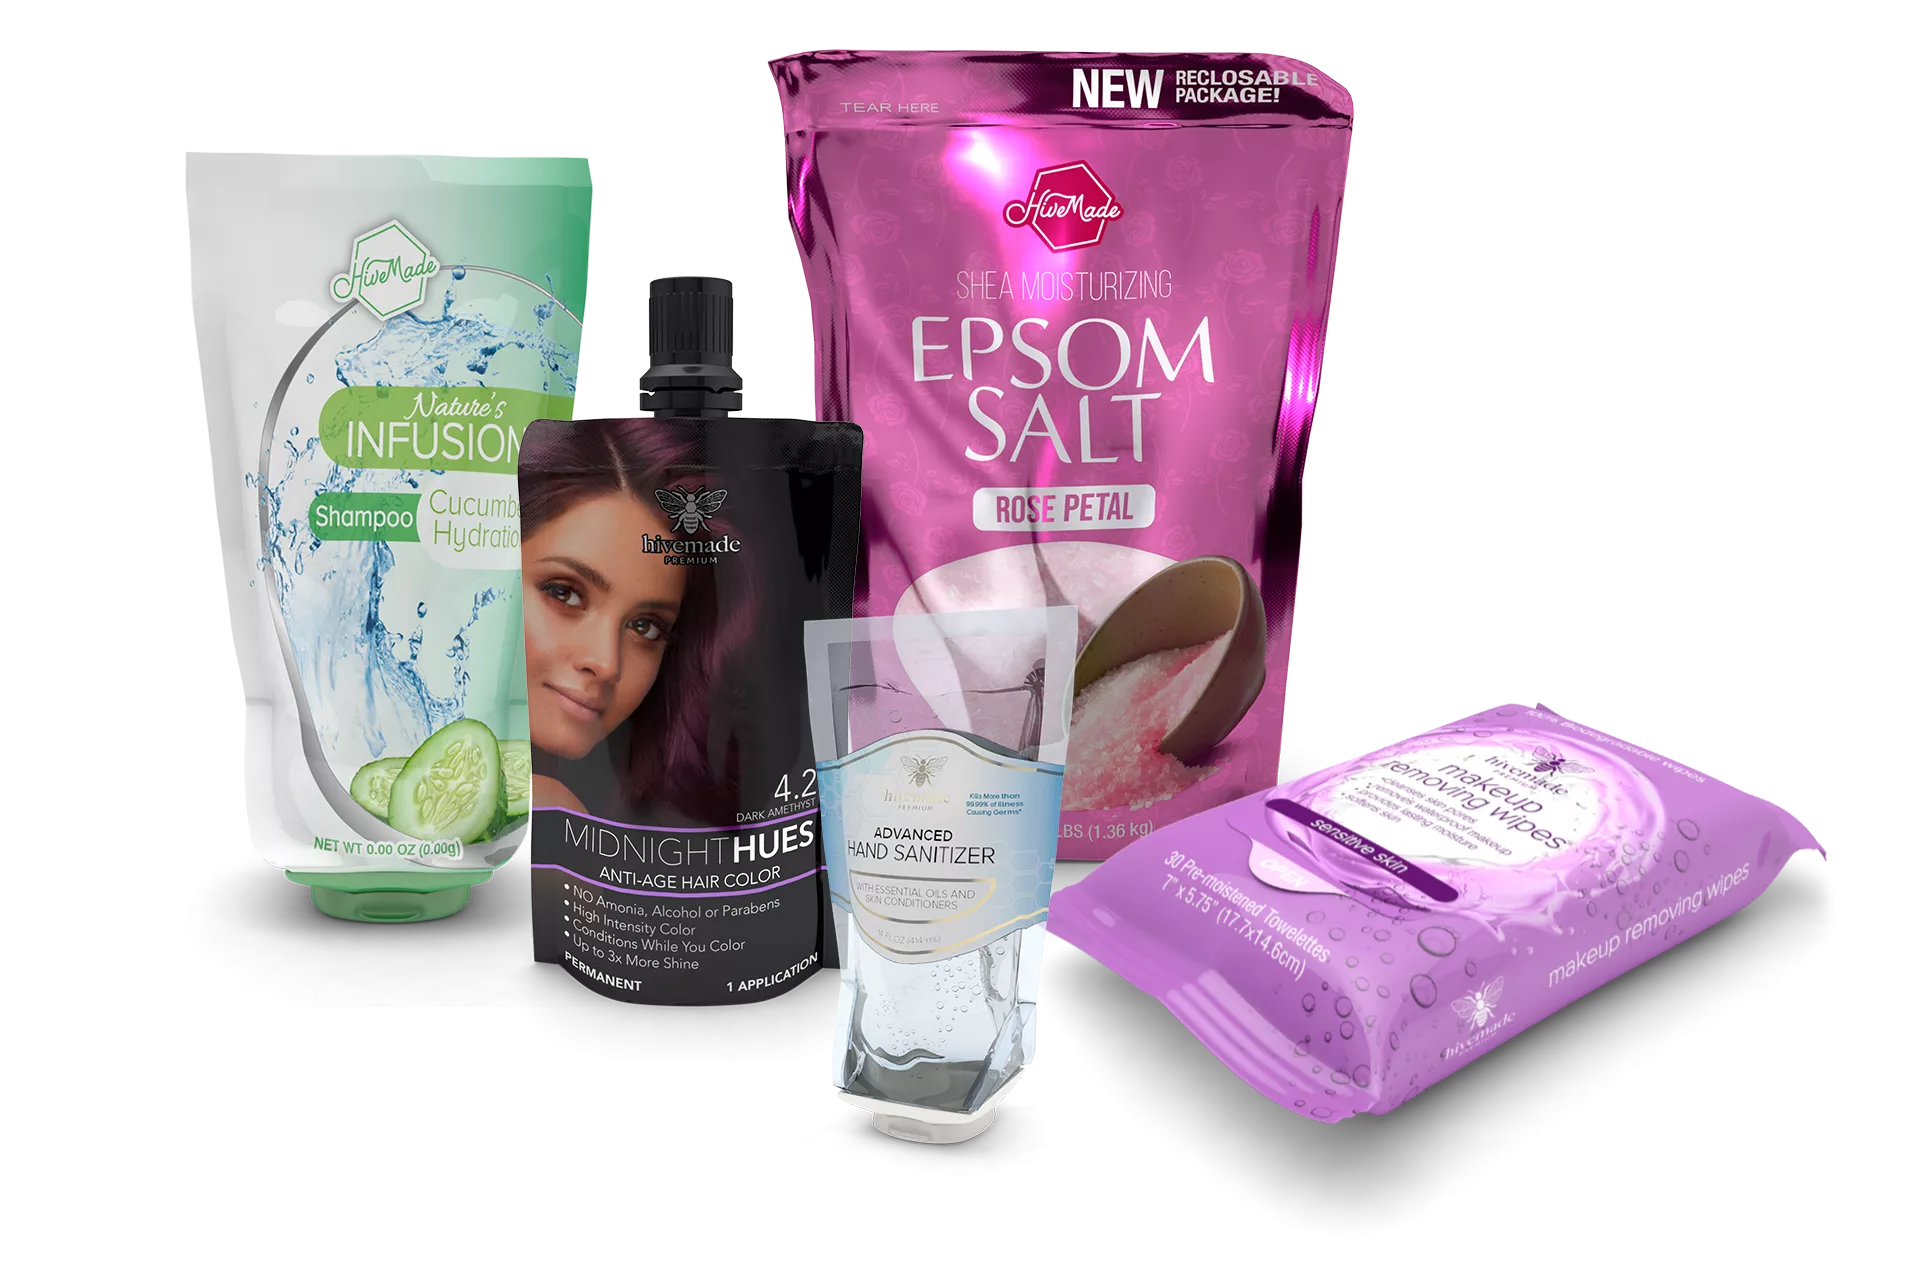 Pouch style package shampoo, hair dye, hand sanitizer and epsom salts